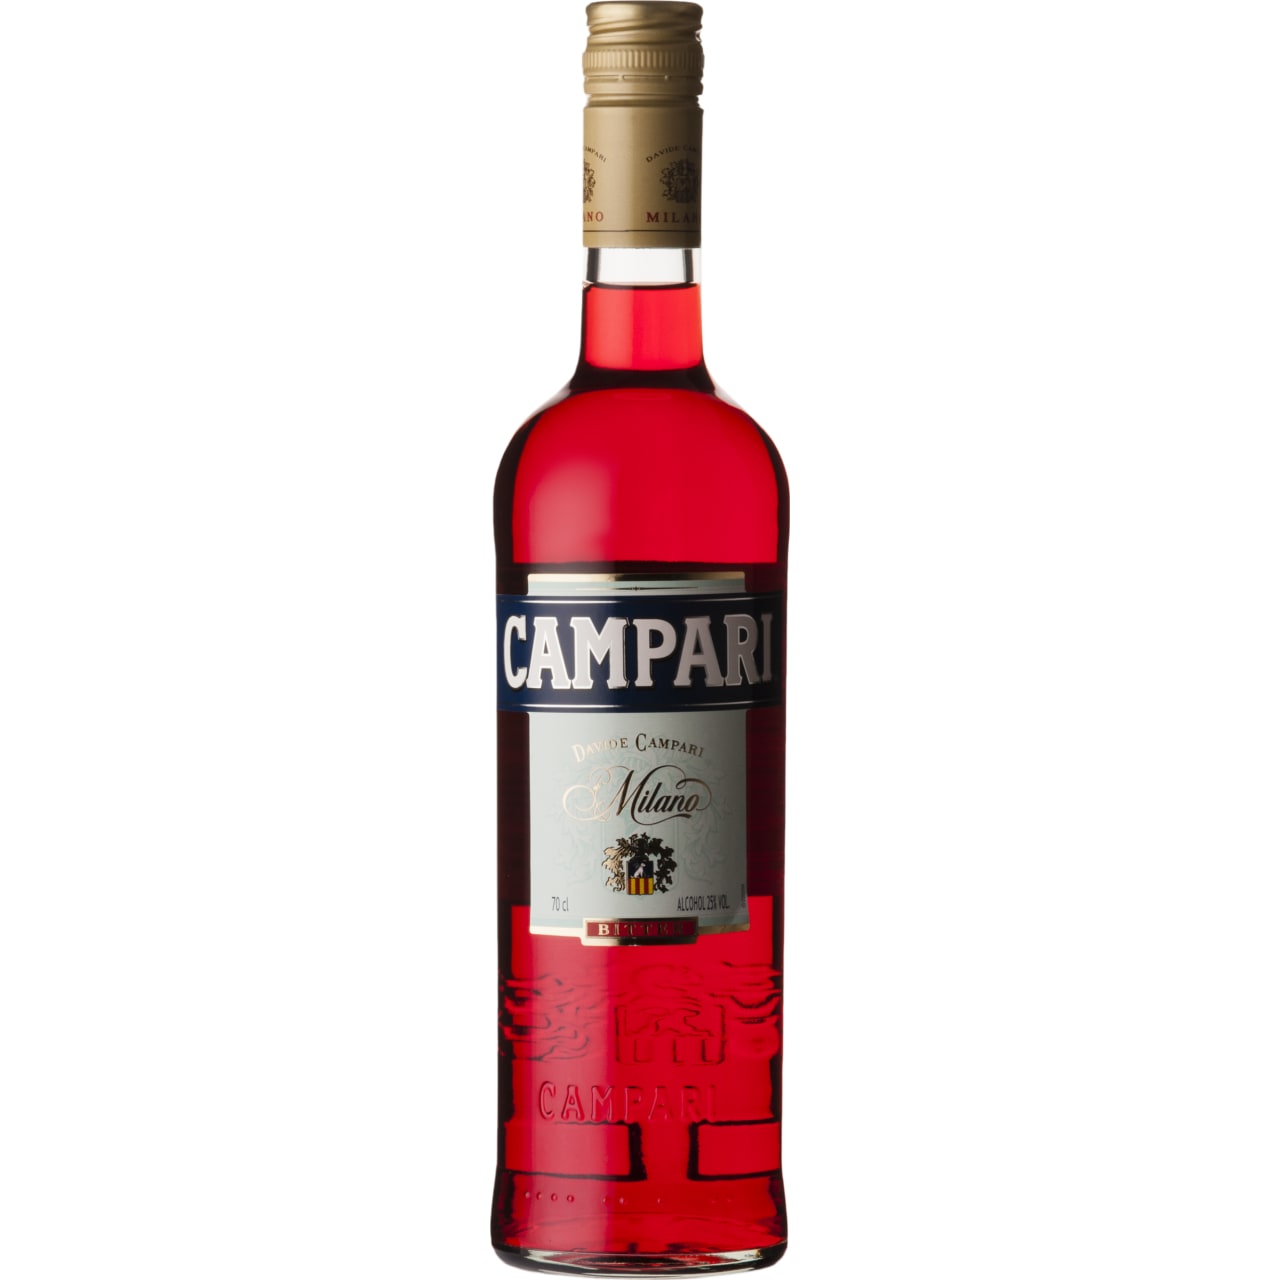 Campari is made from infusing herbs, aromatic plants and fruit in alcohol and water.